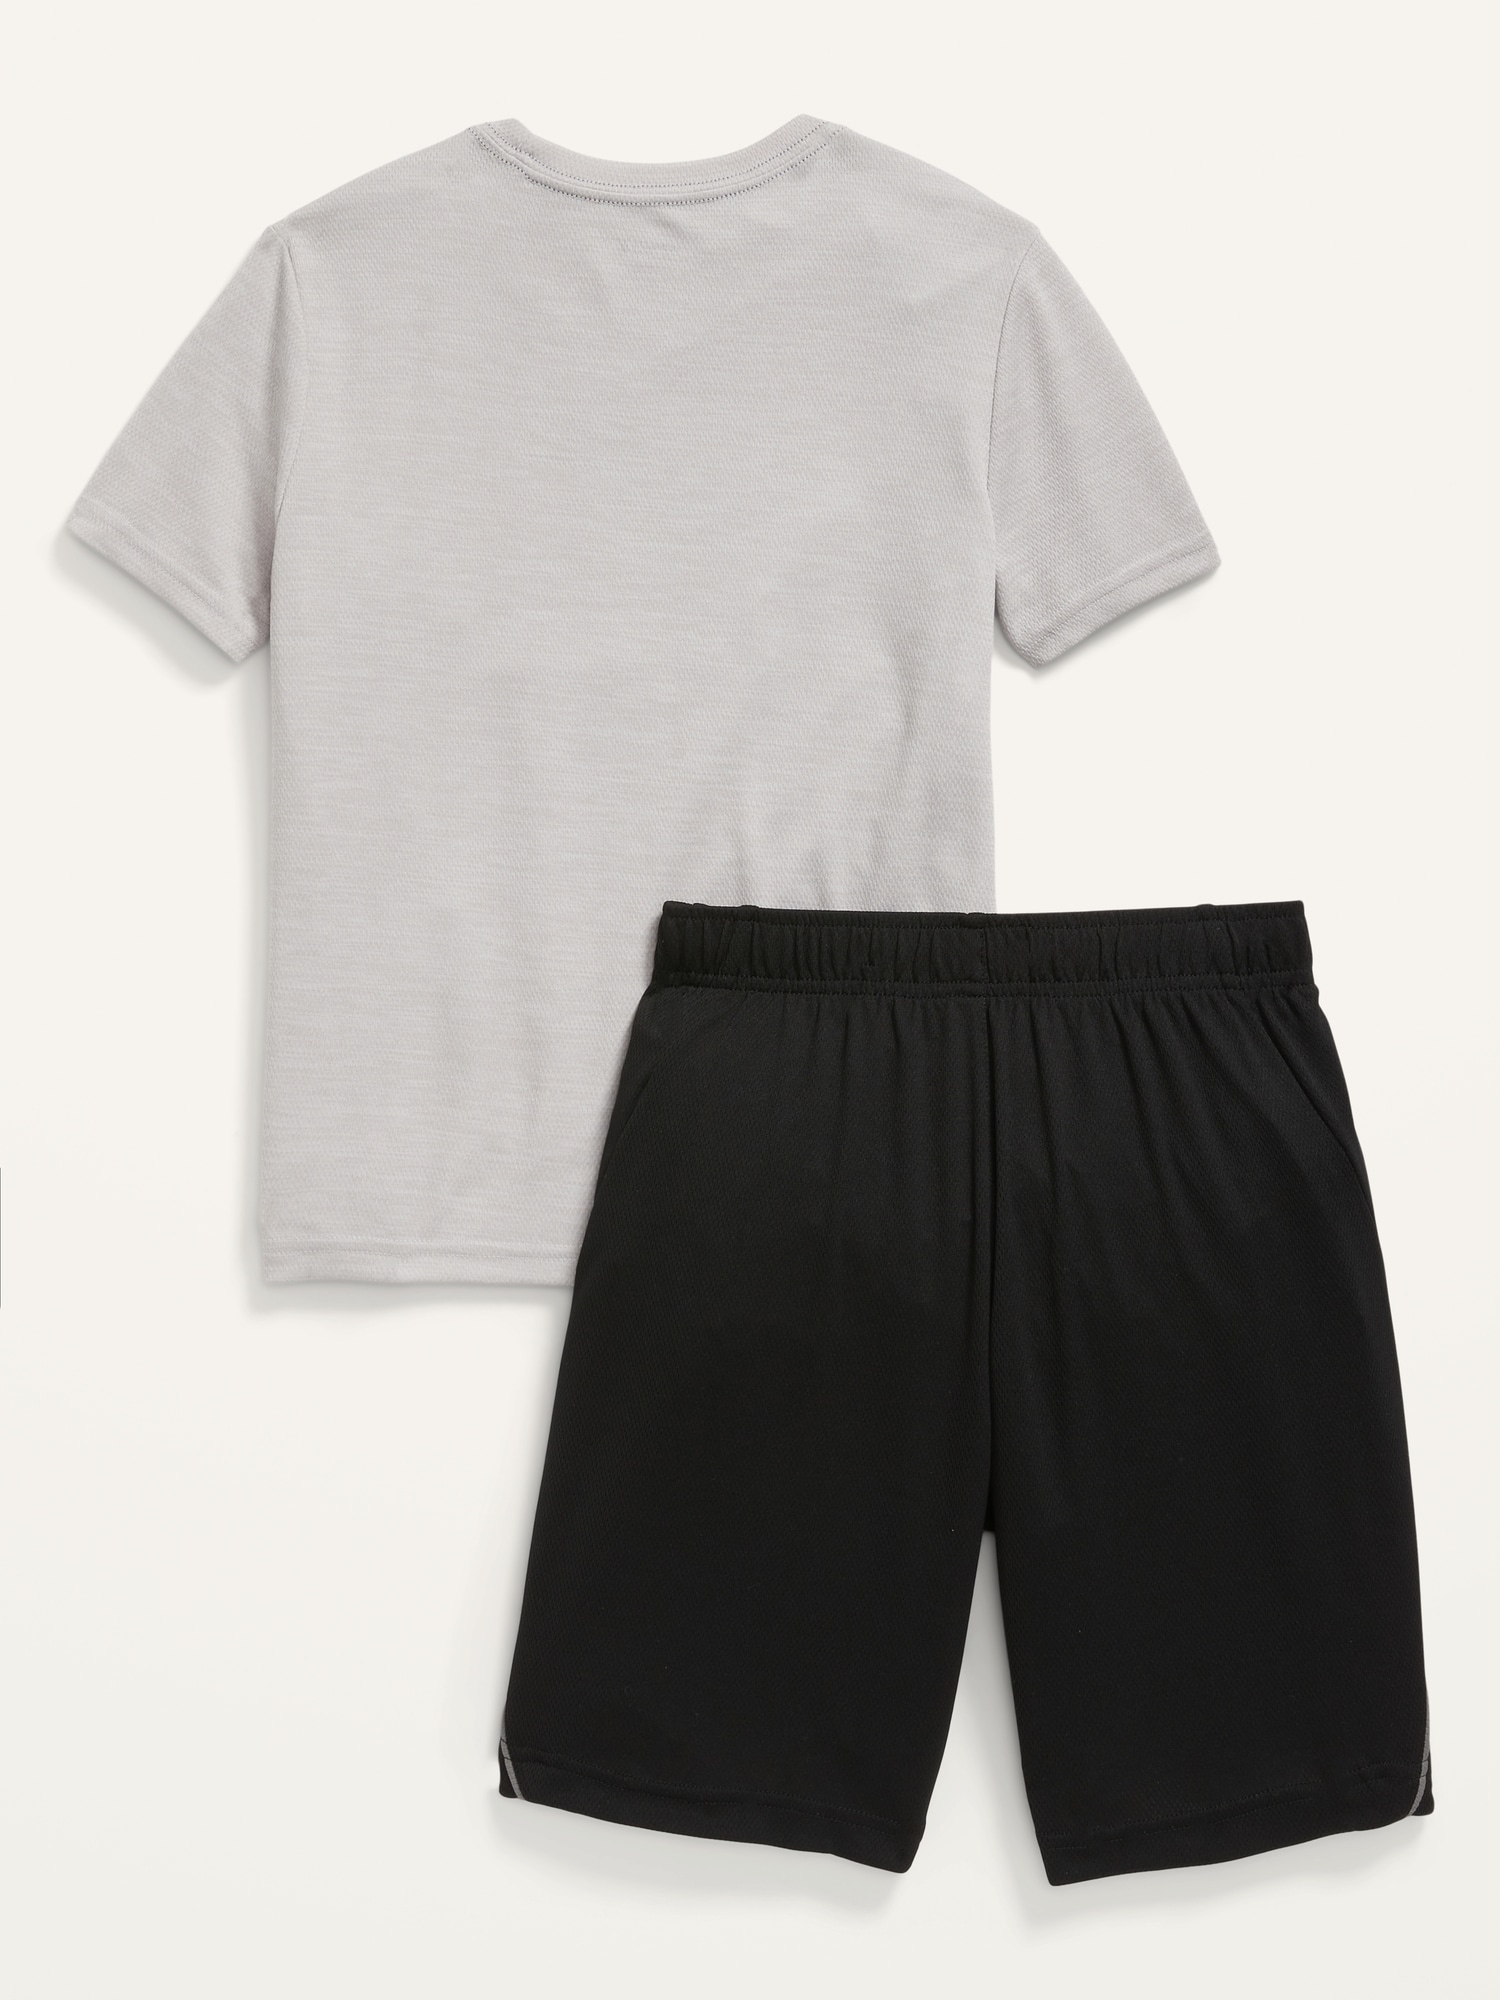 Go-Dry Cool Graphic Tee & Mesh Shorts 2-Pack For Boys | Old Navy